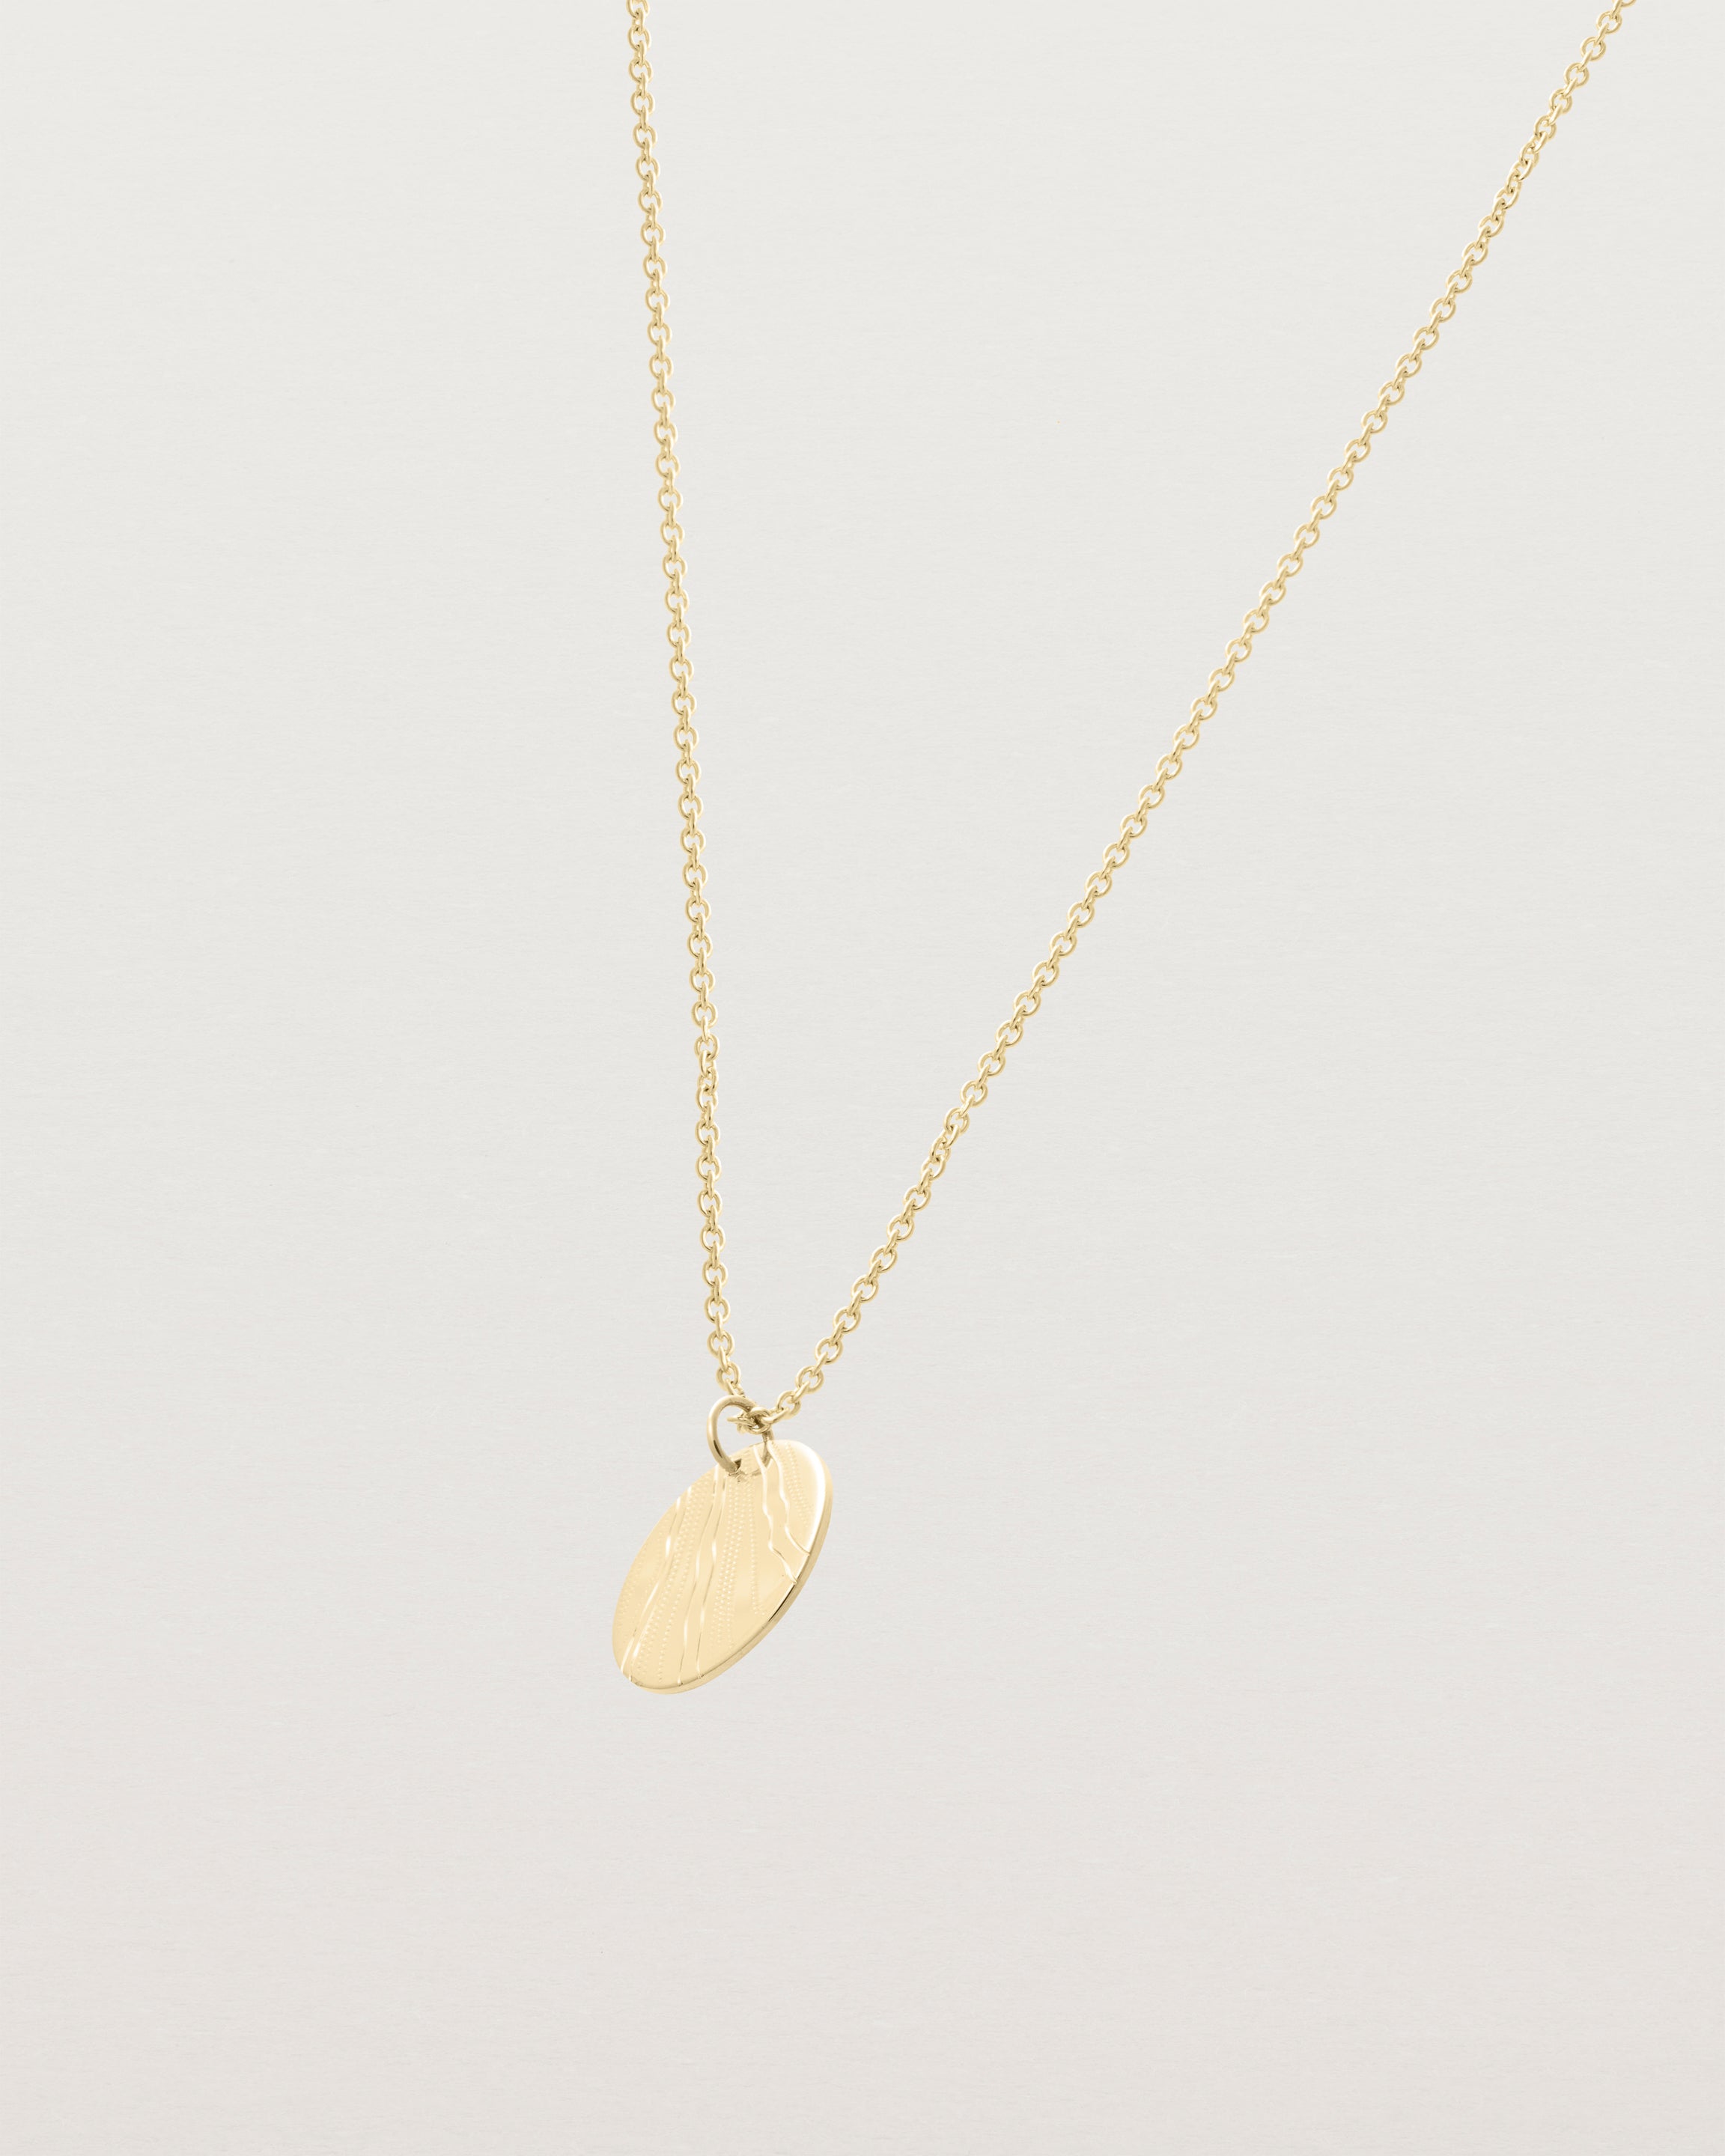 An engraved yellow gold pendant